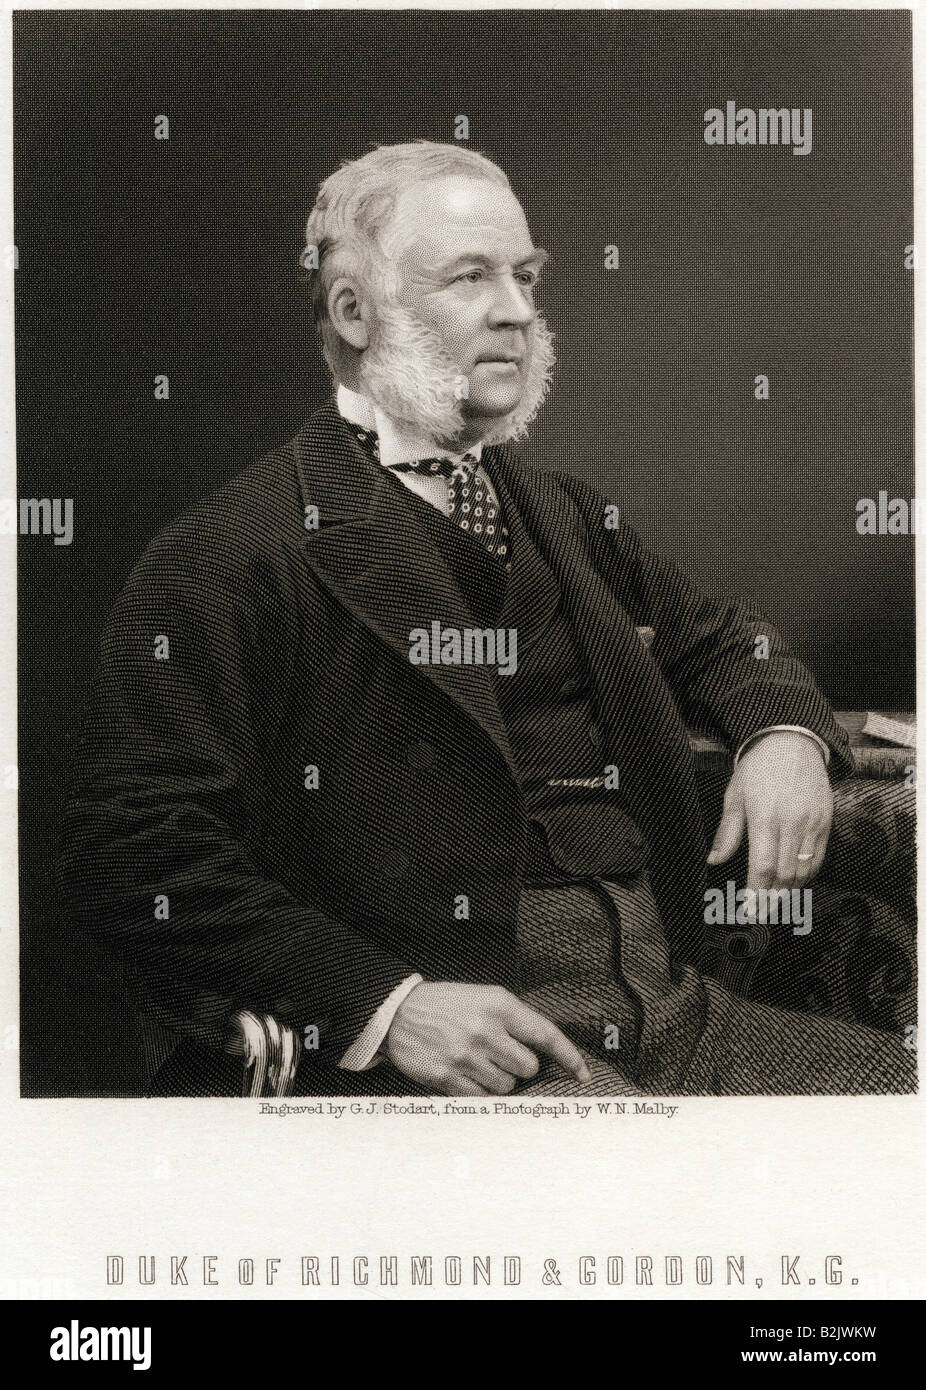 Gorden-Lennox, Charles Henry, Duke of Richmond, 27.2.1818 - 27.9.1903, British politician, half length, steel engraving by G. J. Stodart, from a photograph by W. N. Malby, London, England, 19th century, Artist's Copyright has not to be cleared Stock Photo